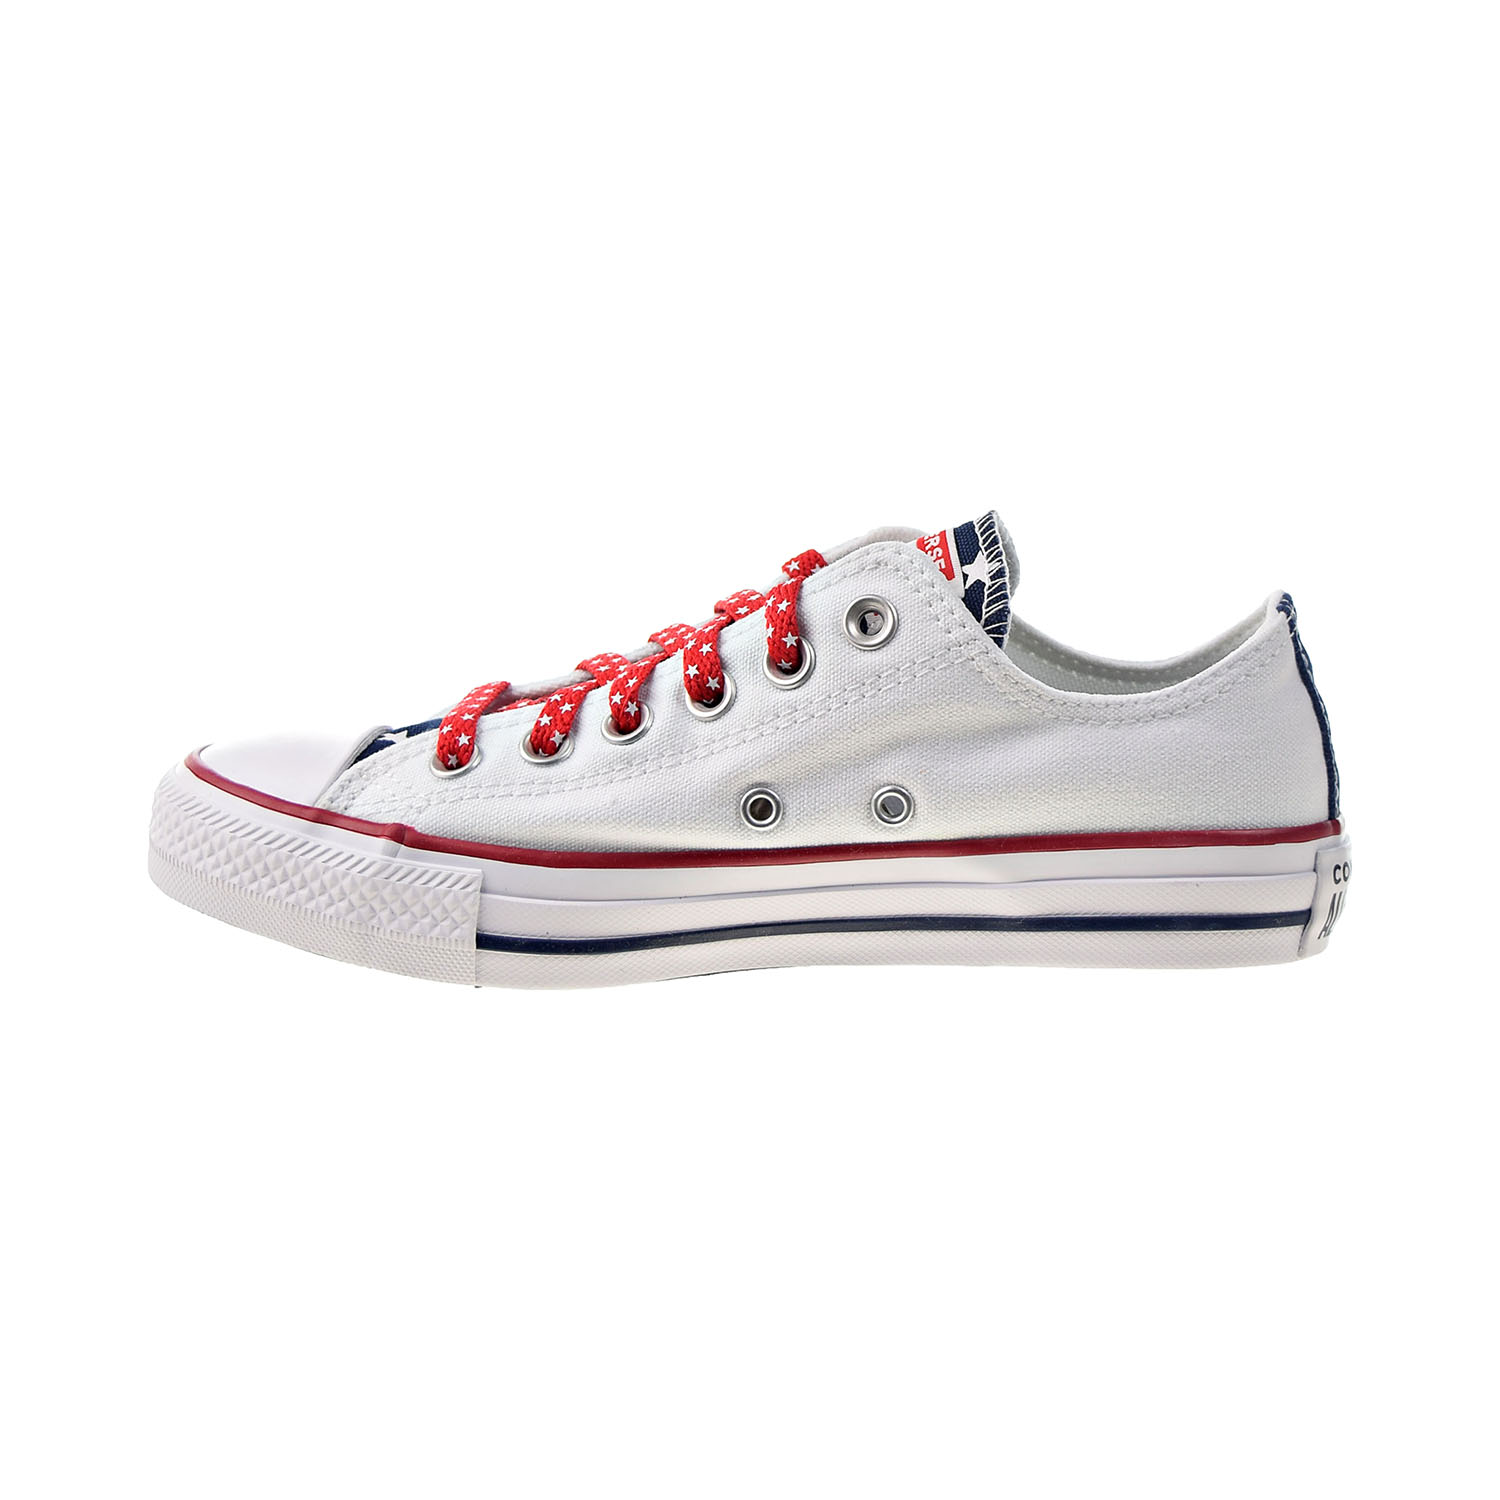 Converse Chuck Taylor All Star Ox Stars & Stripes Men's Shoes White-Red 170815f